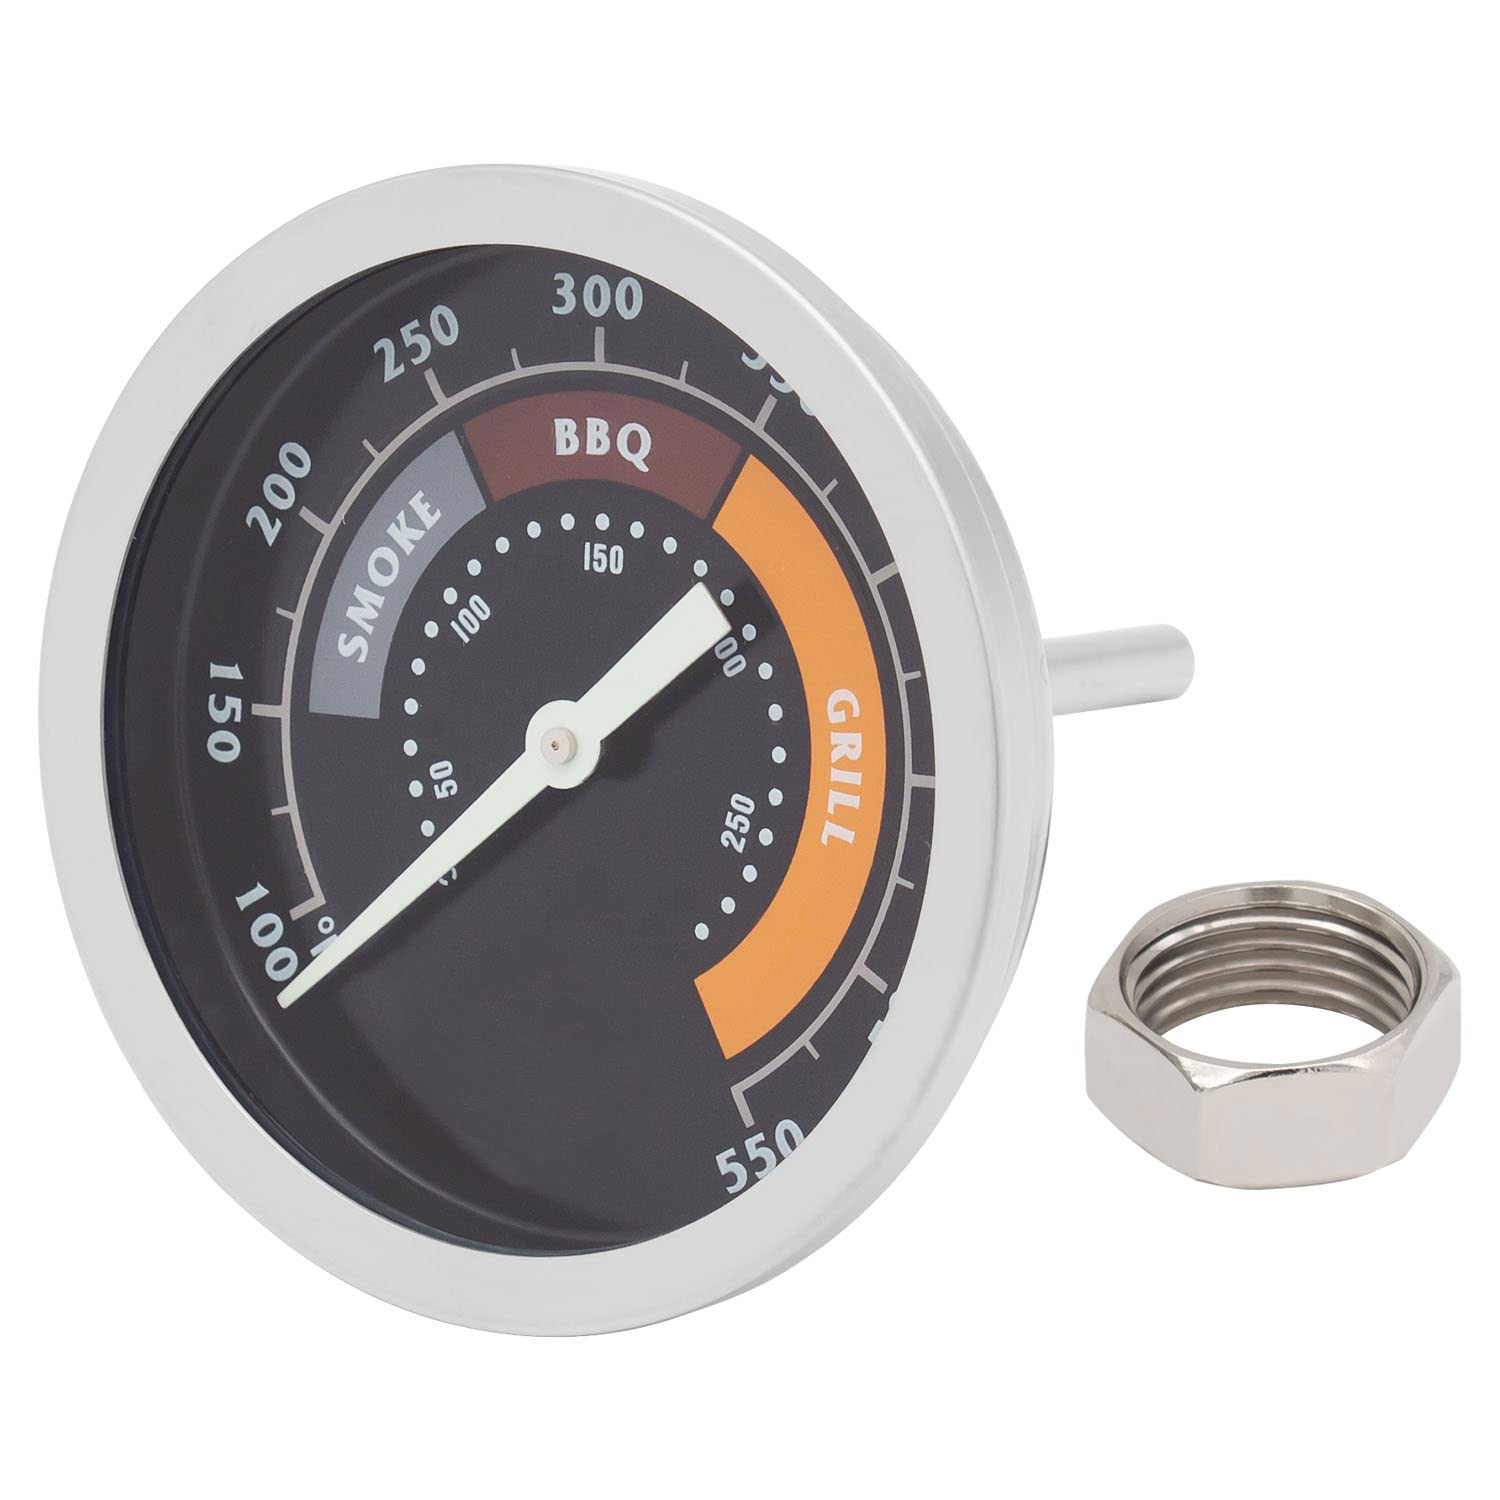 Charcoal Grill Temperature Gauge, Accurate BBQ Grill Smoker